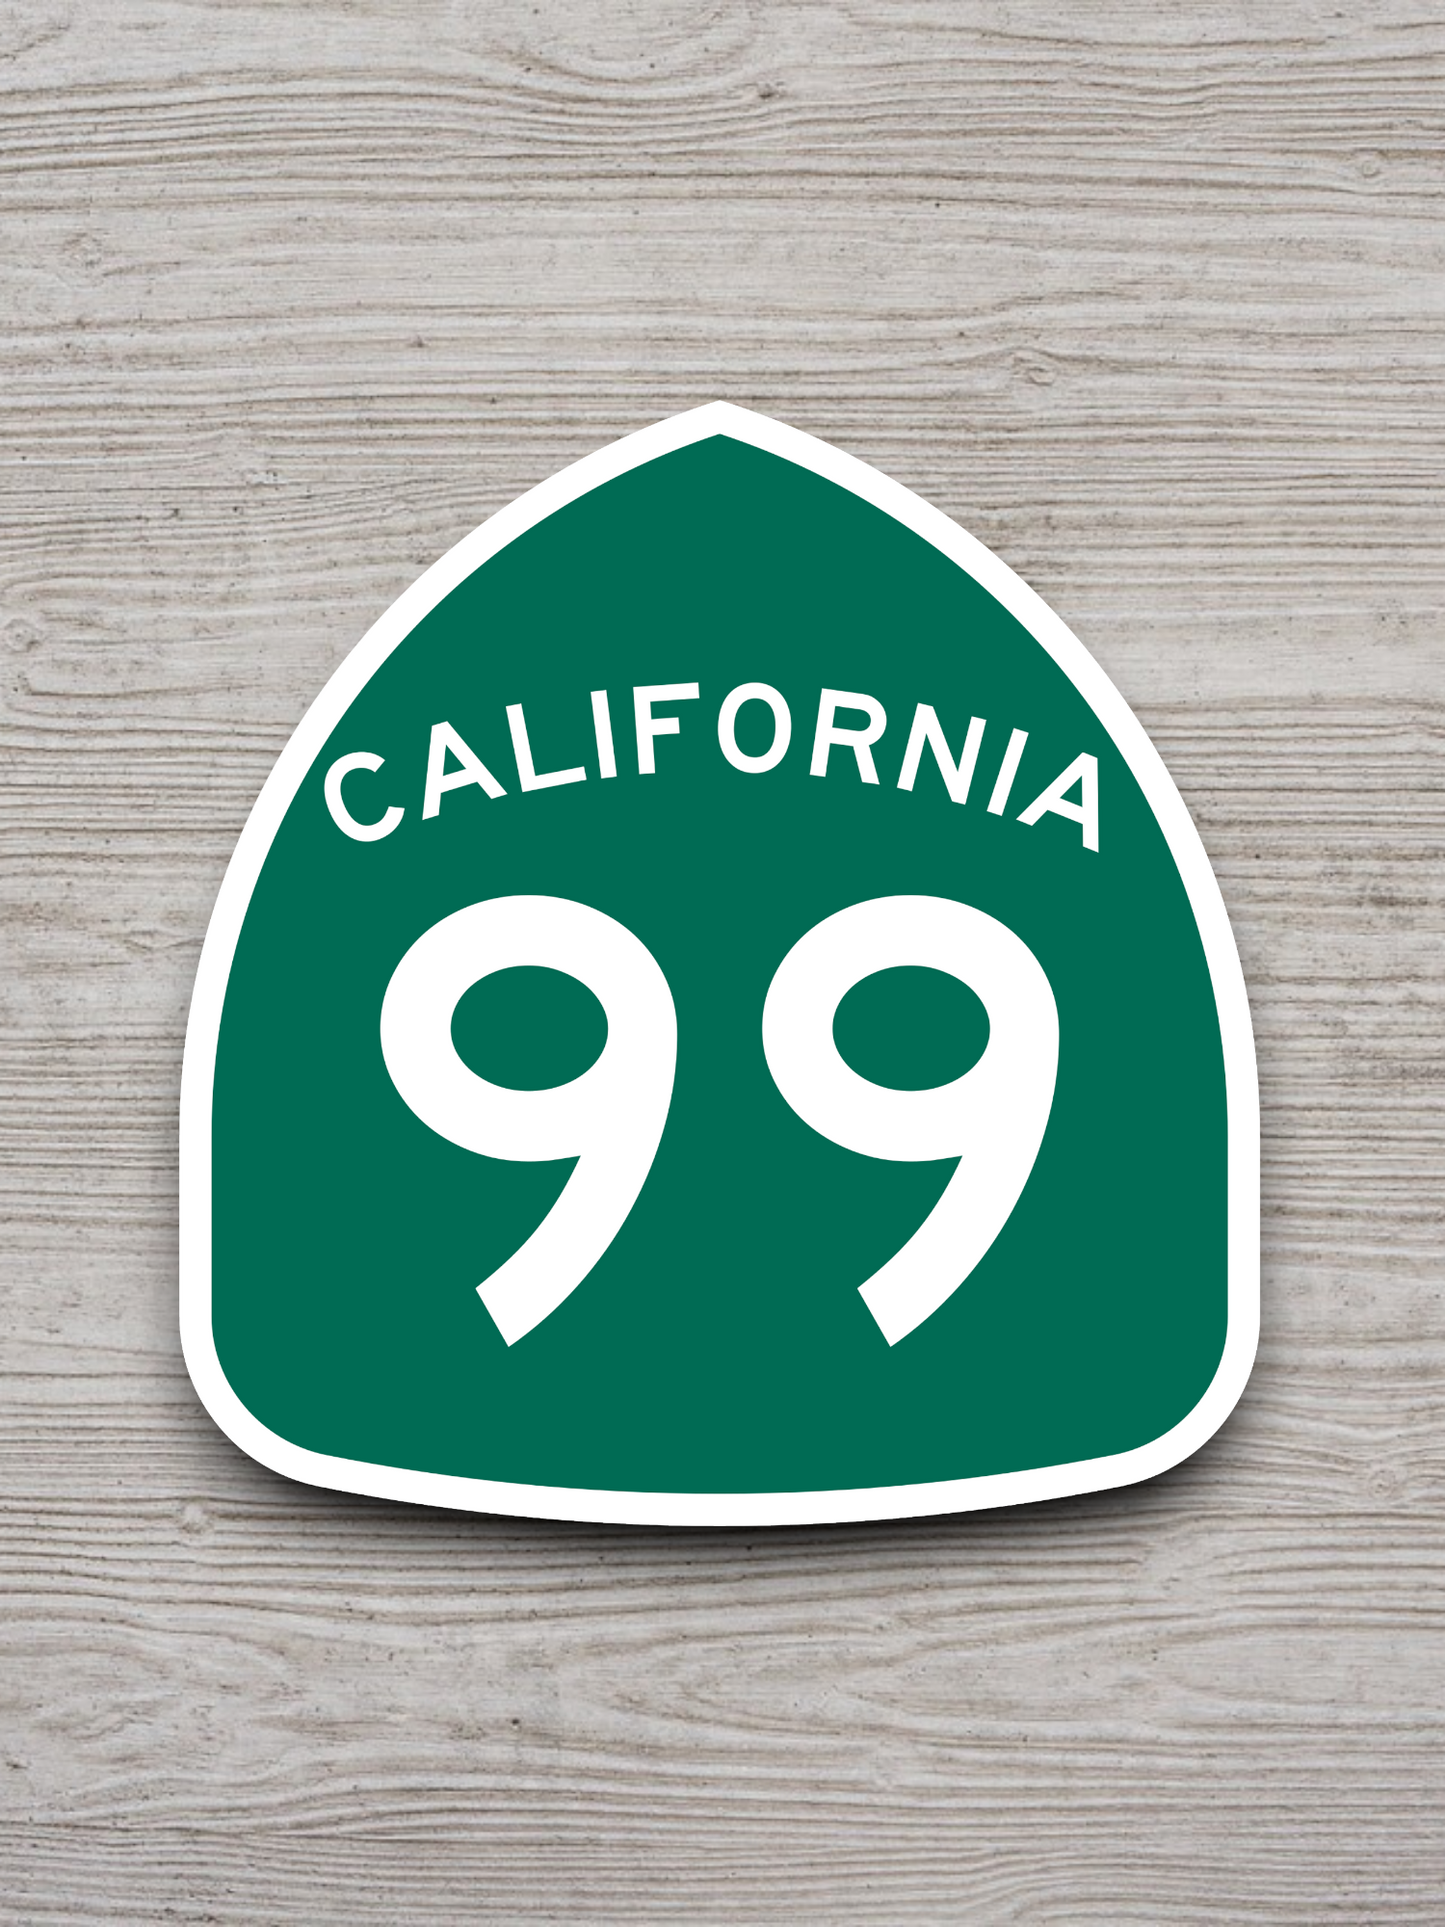 California State Route 99 Road Sign Sticker